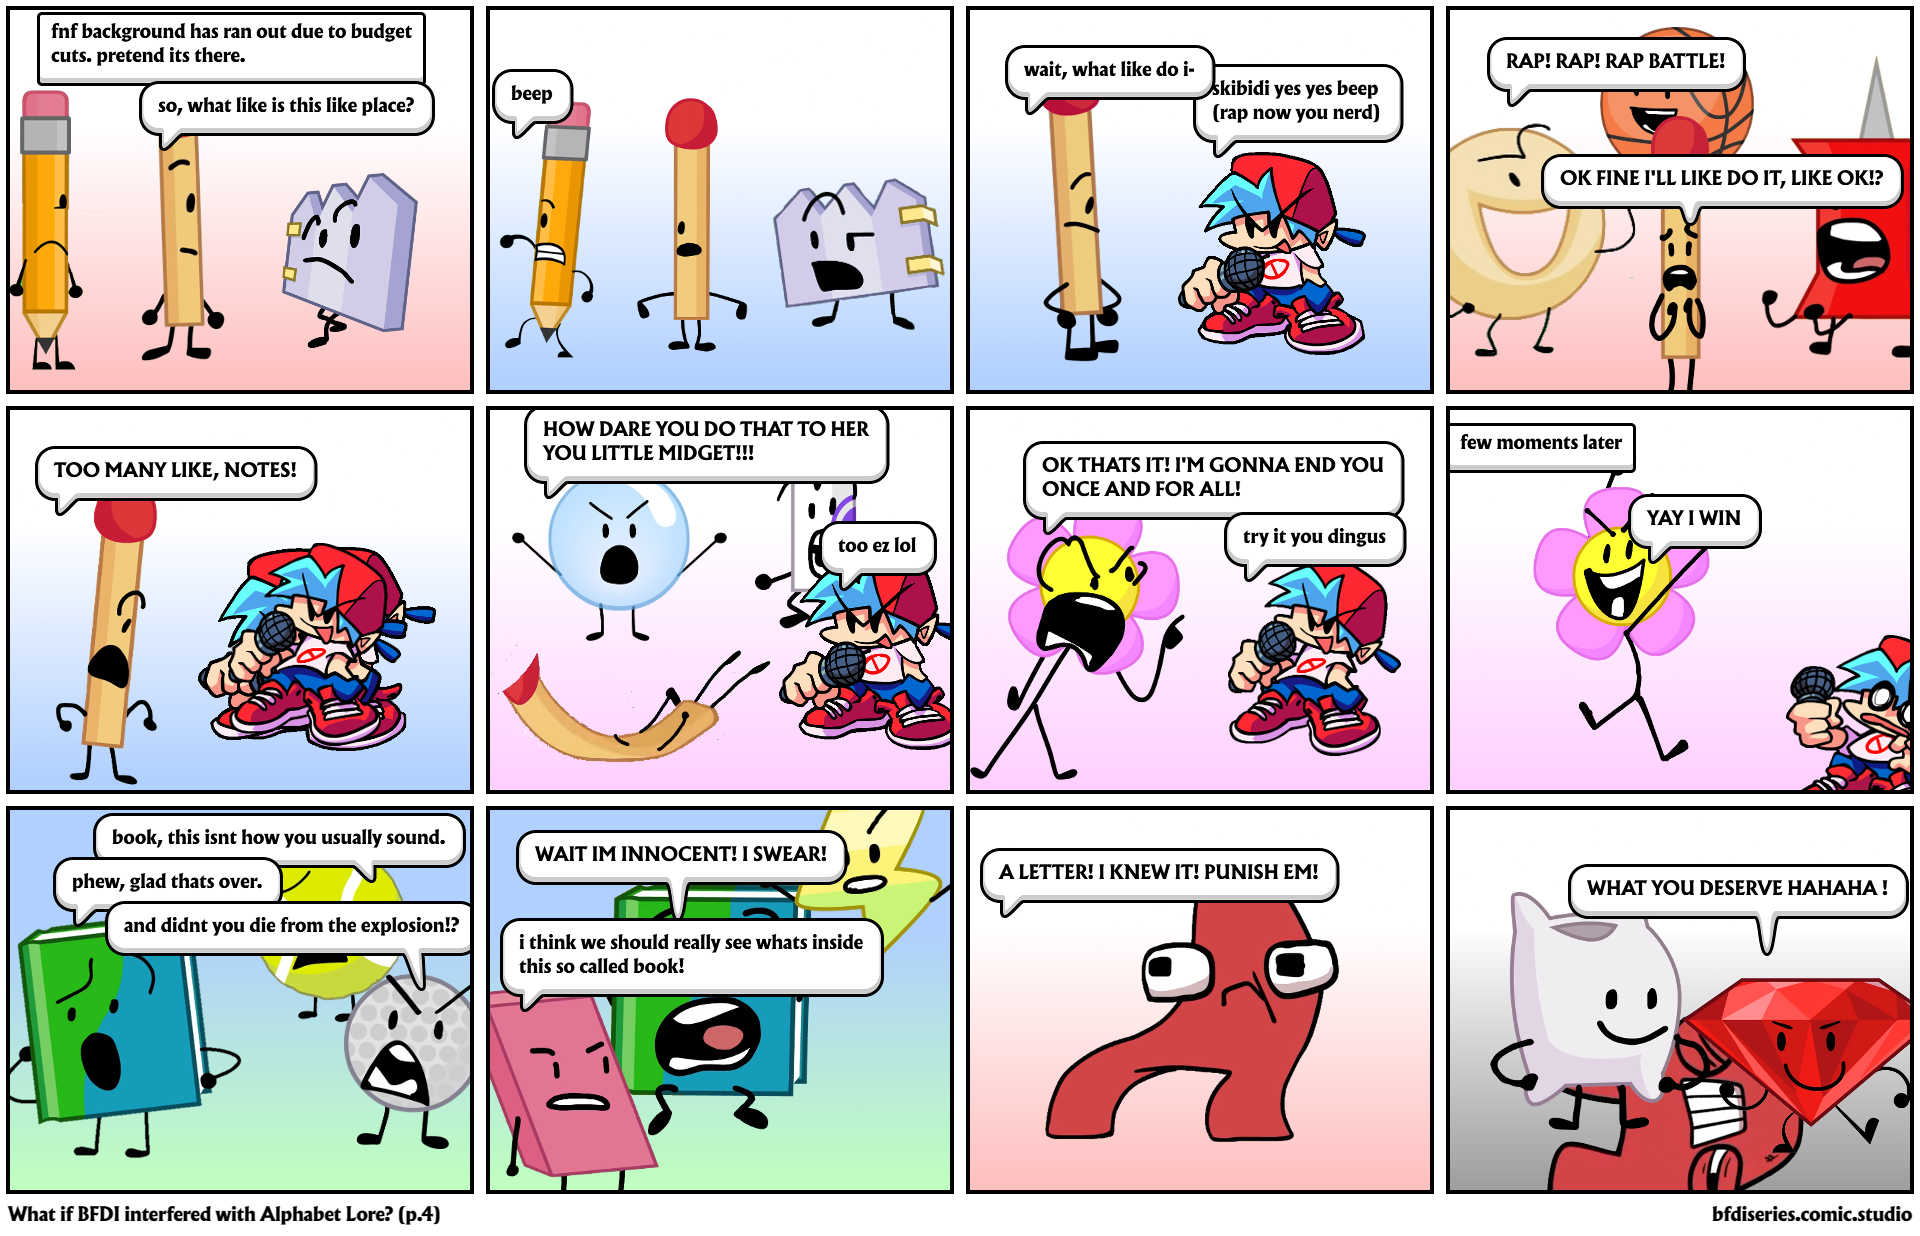 What if BFDI interfered with Alphabet Lore? (p.4)